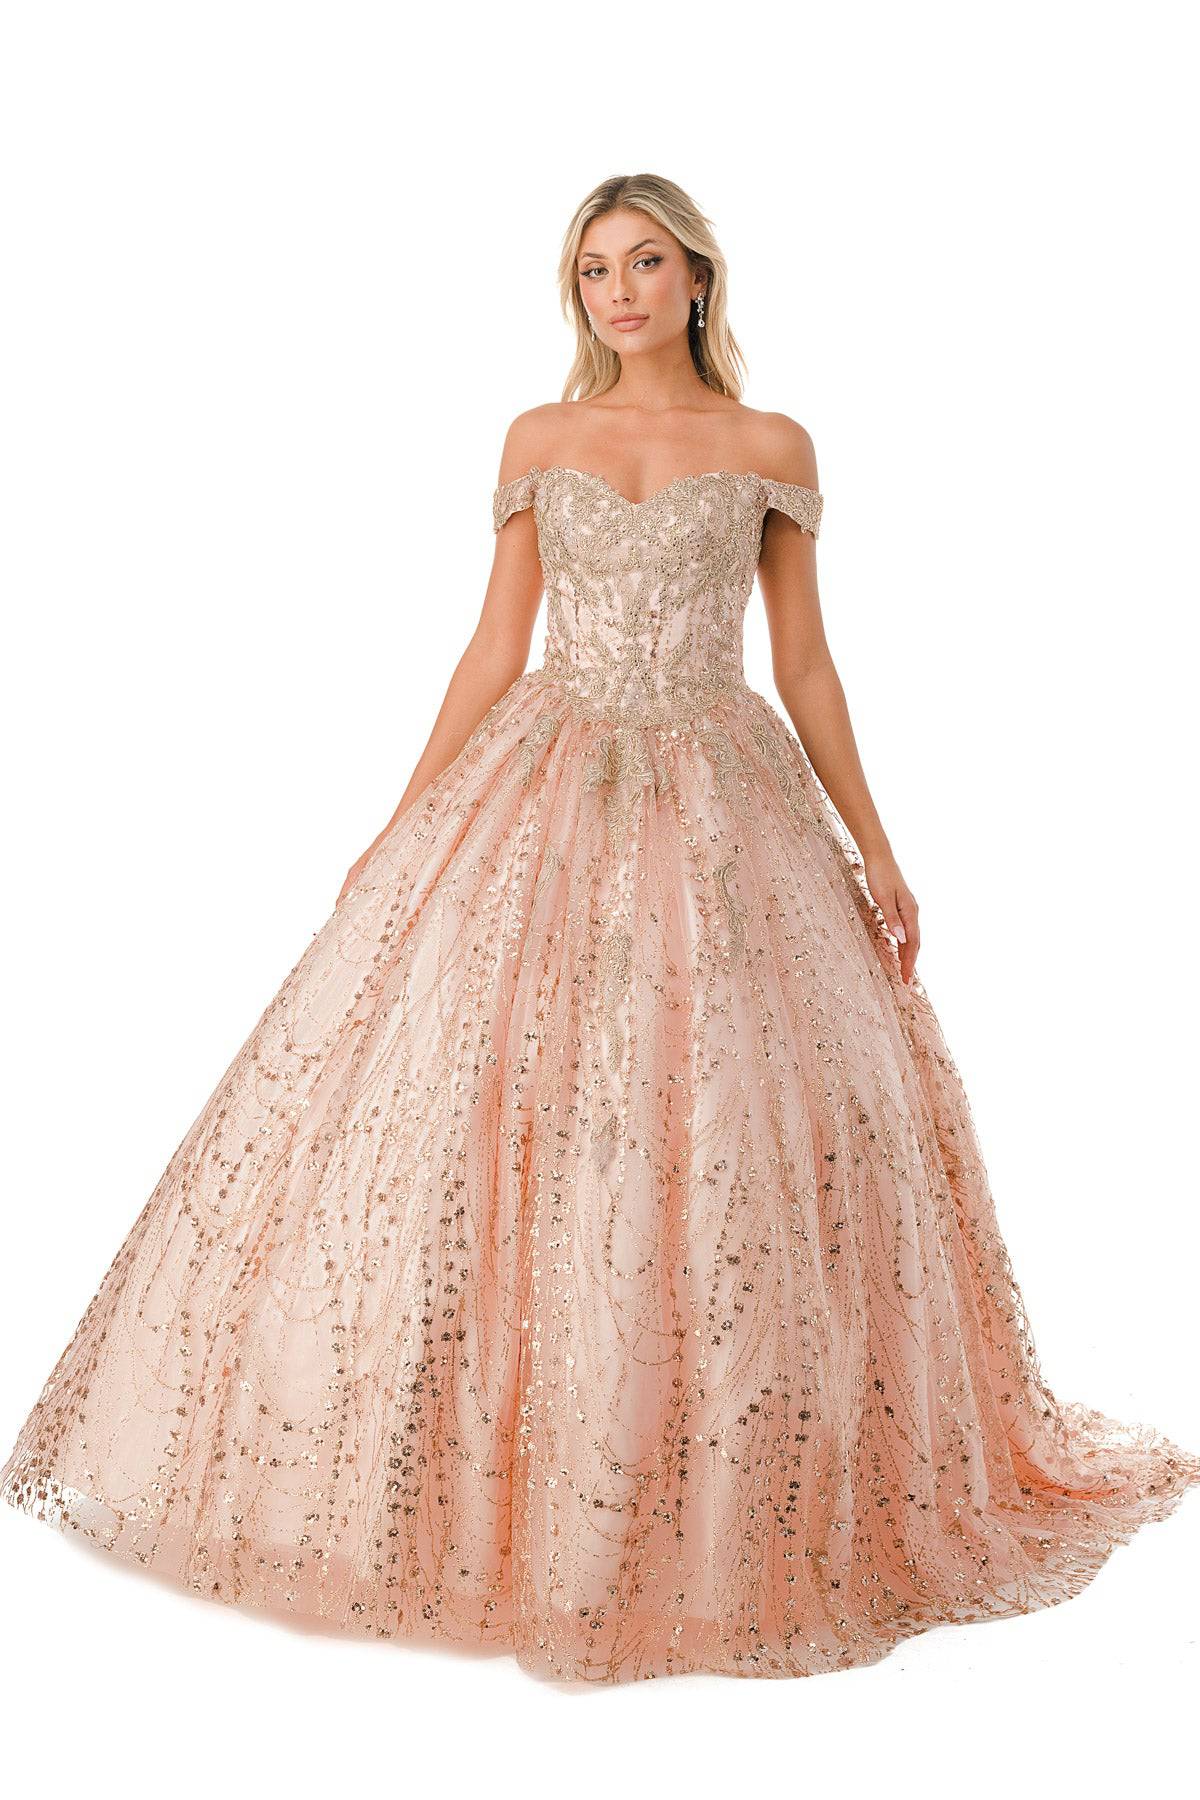 Aspeed L2753T Stunning Seqin Embroidered Quinceanera Dress - NORMA REED